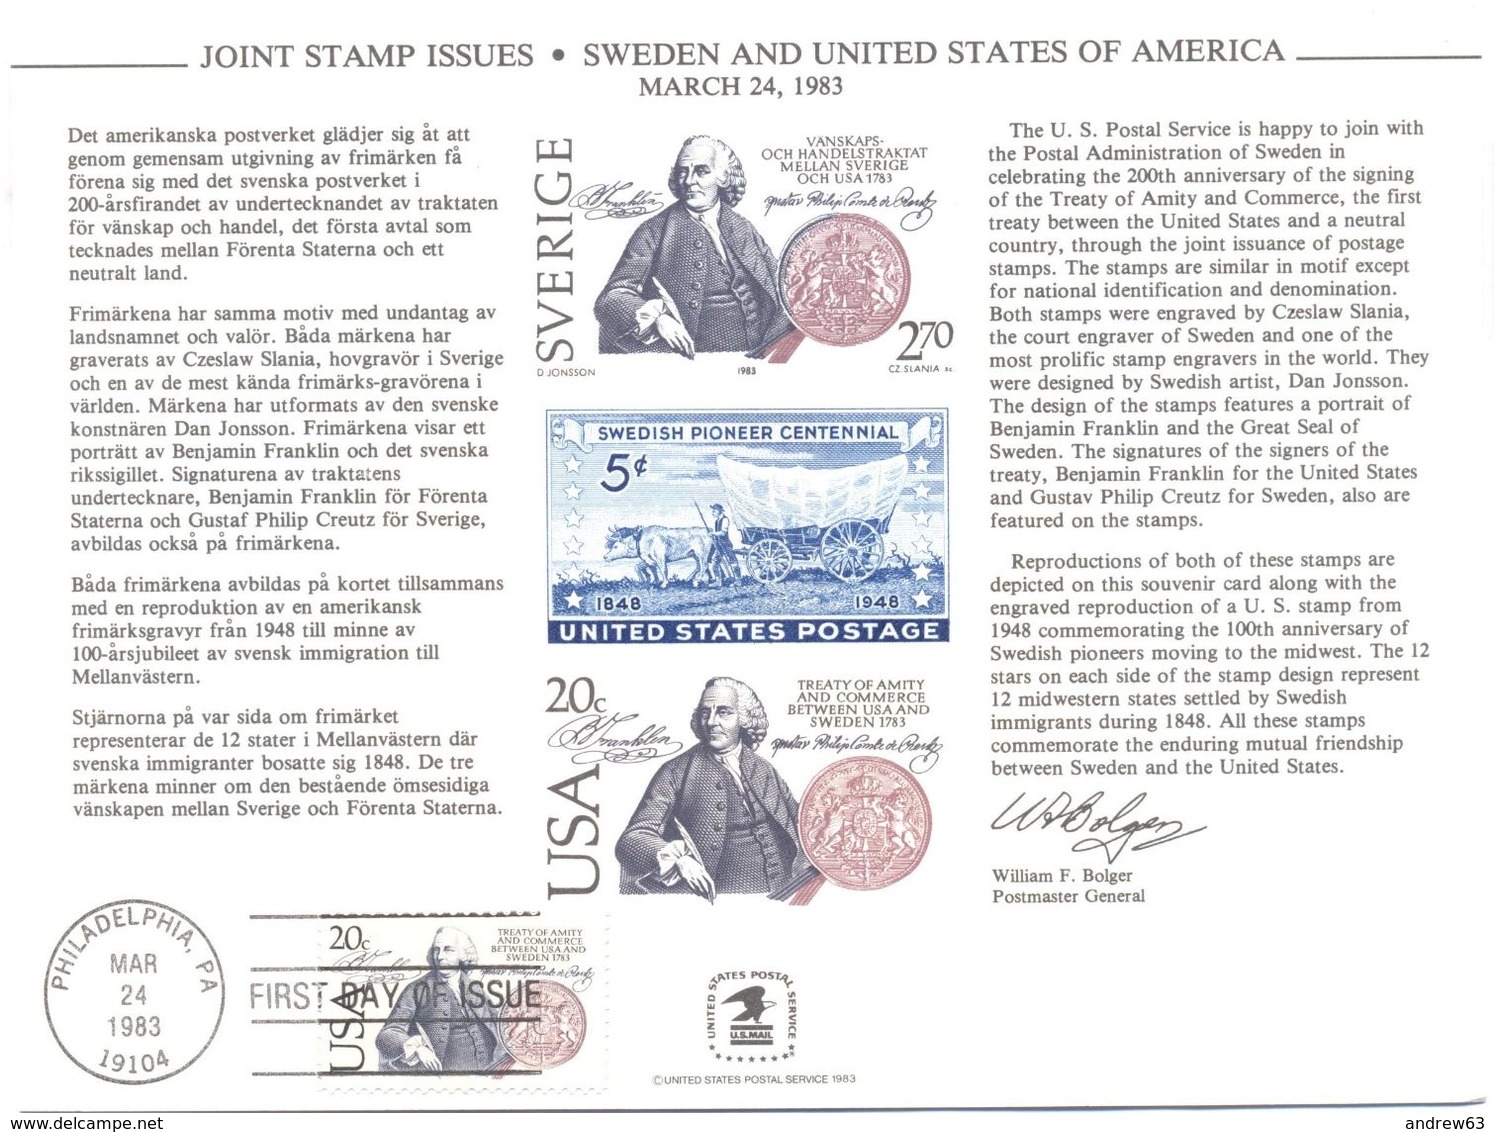 STATI UNITI - USA - 1983 - Cancelled Mint Souvenir Card - Joint Stamp Issues - USA-SWEDEN 200th Ann. Of Treaty - FDC - Recordatorios